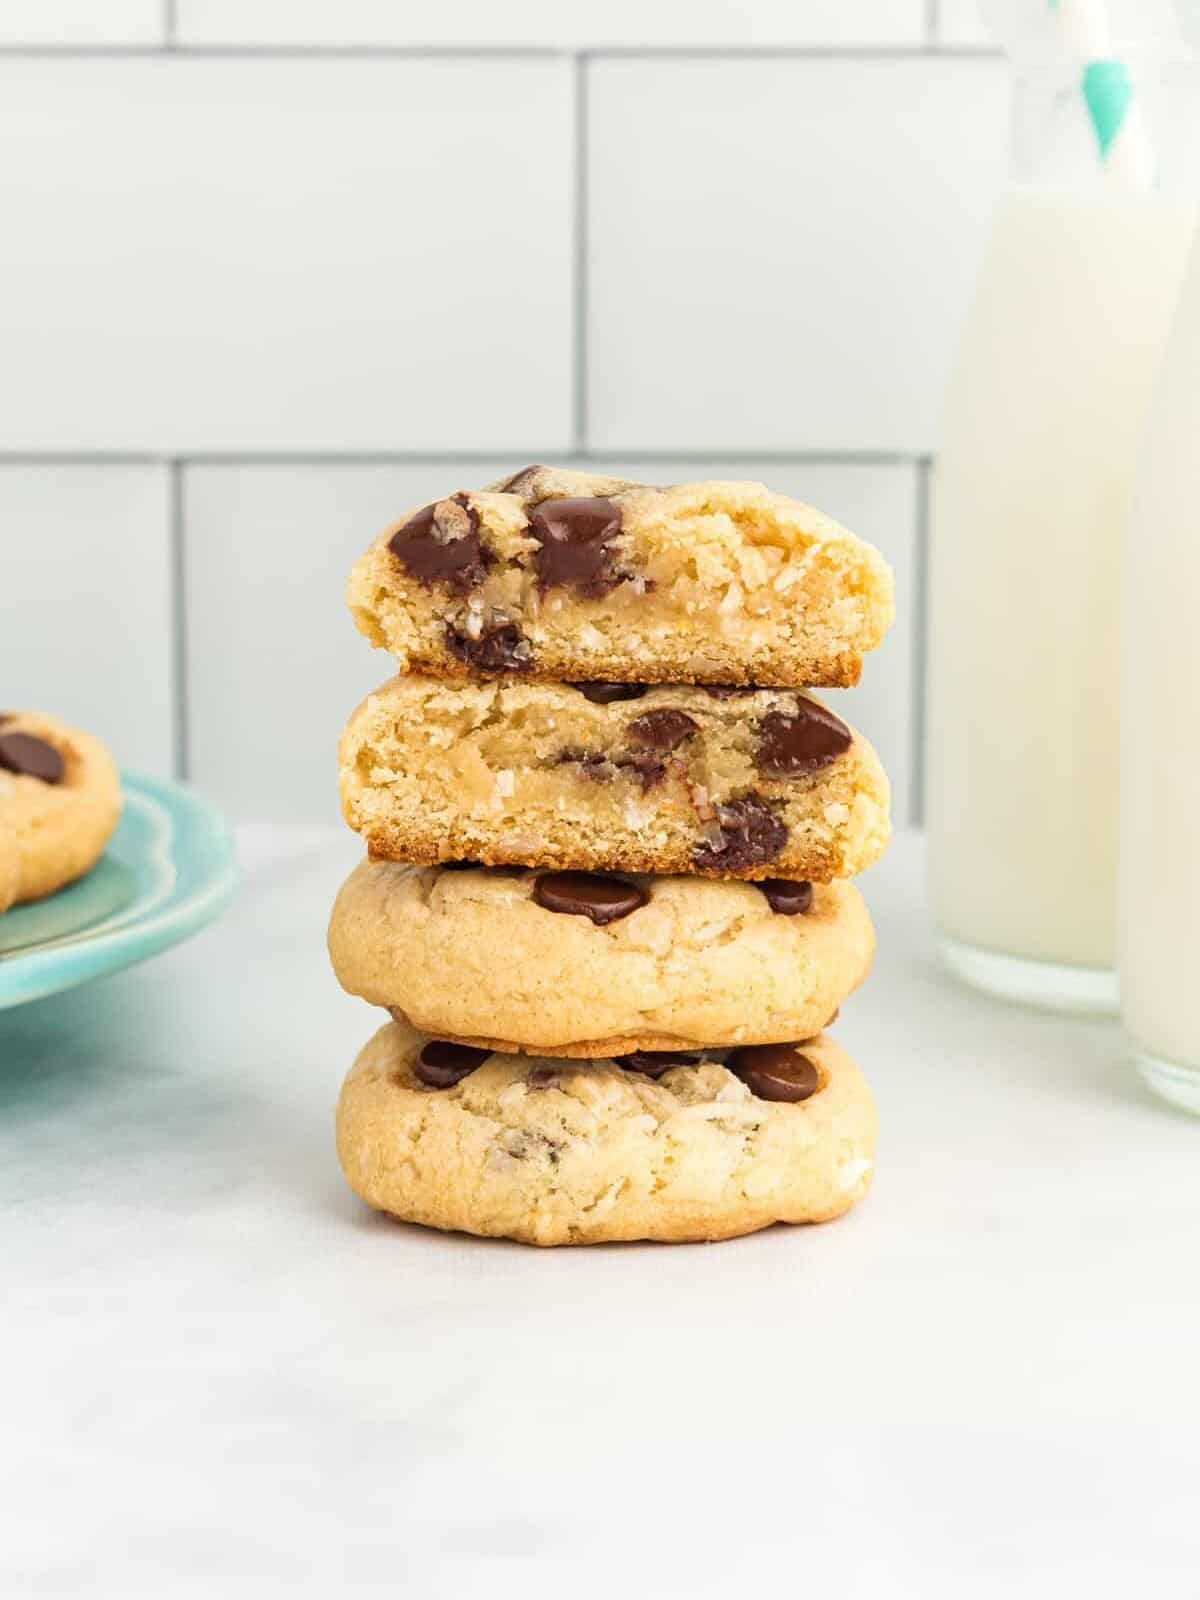 a halved shredded coconut and chocolate chip cookie stacked on top of 2 whole cookies to show the interior texture.